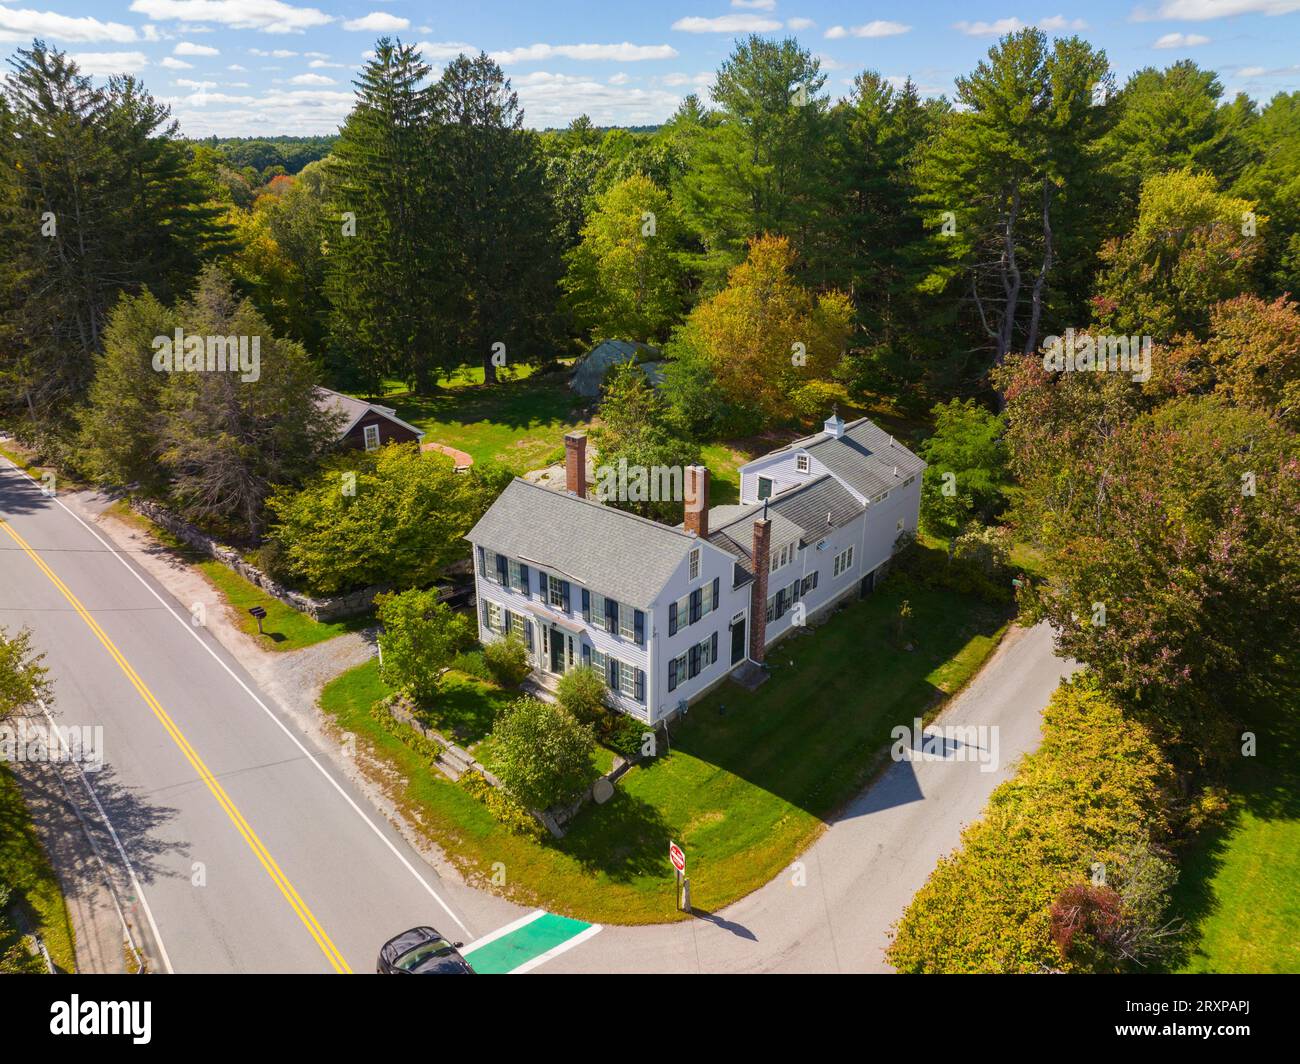 Historic colonial style building aerial view at 46 Concord Street at Carlisle historic town center near Town Common, Carlisle, Massachusetts MA, USA. Stock Photo